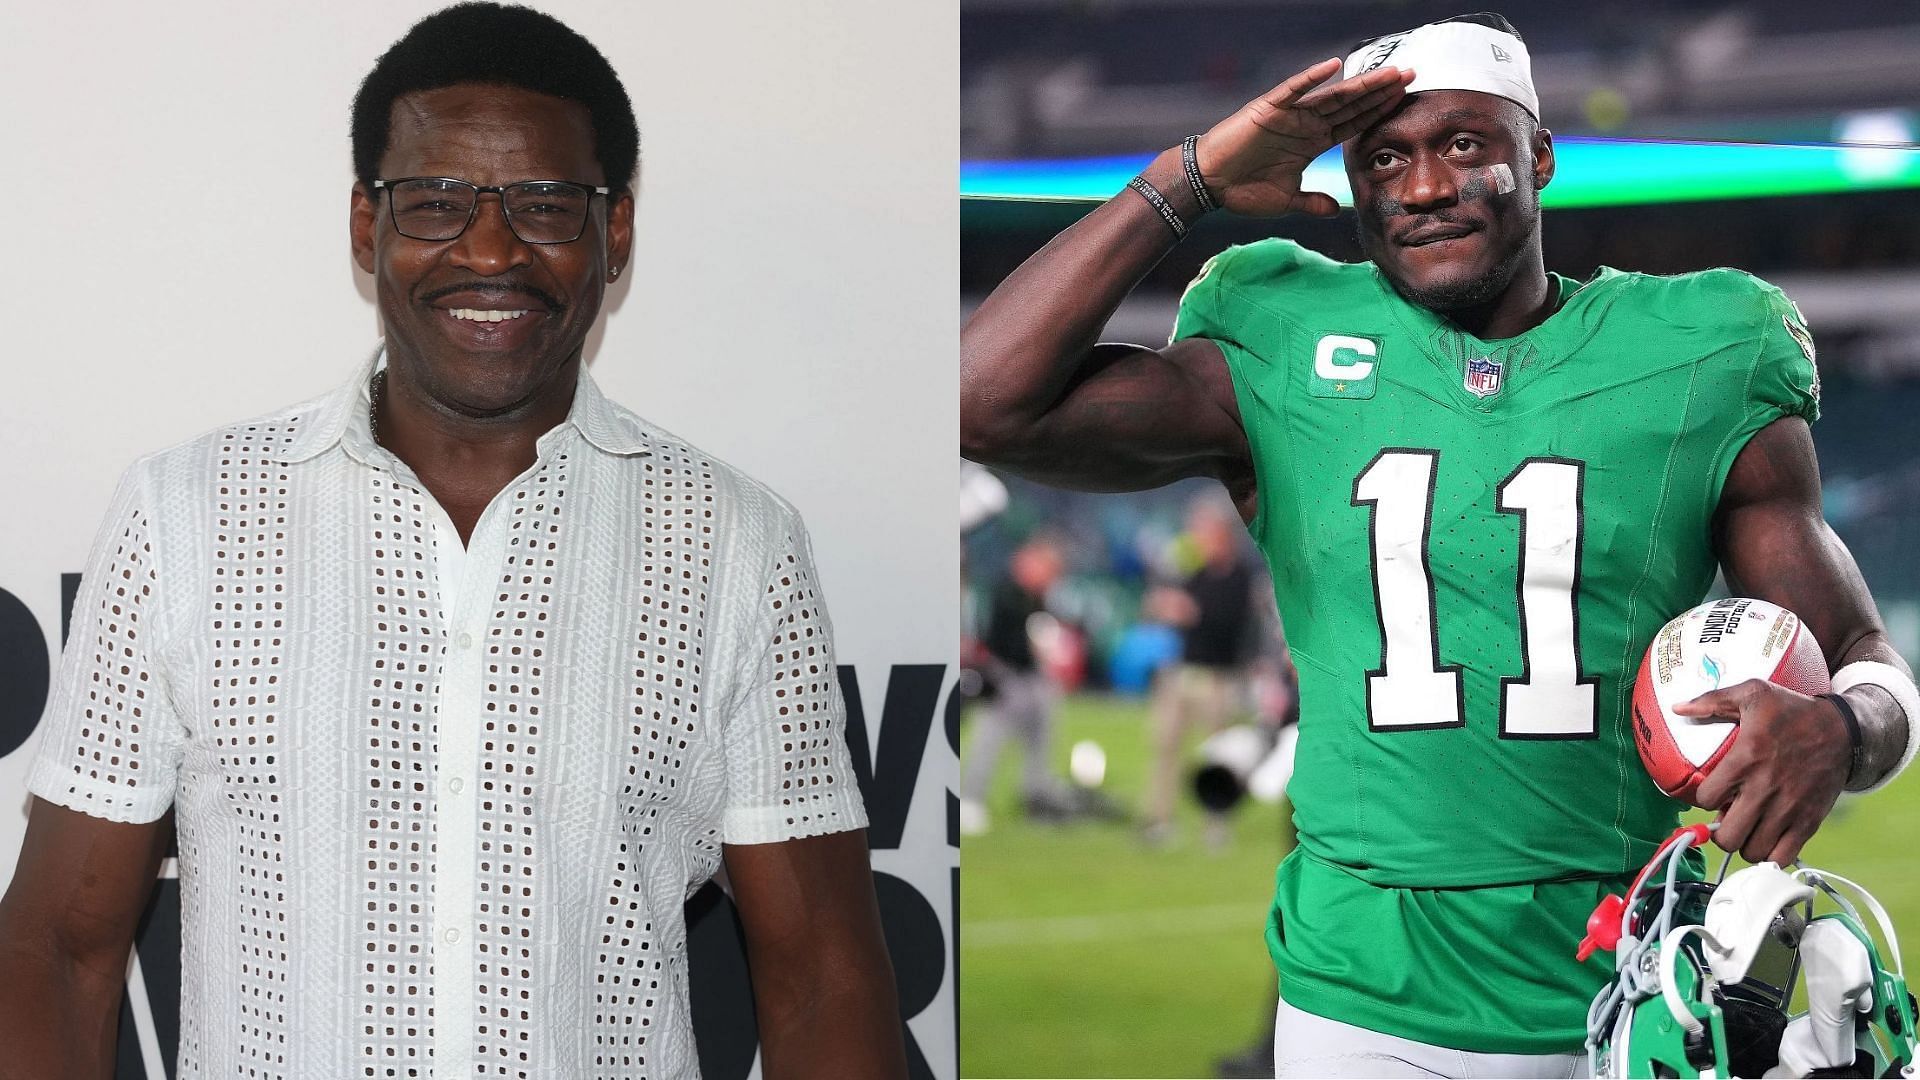 Pro Football Hall of Famer Michael Irvin and Philadelphia Eagles wide receiver AJ Brown